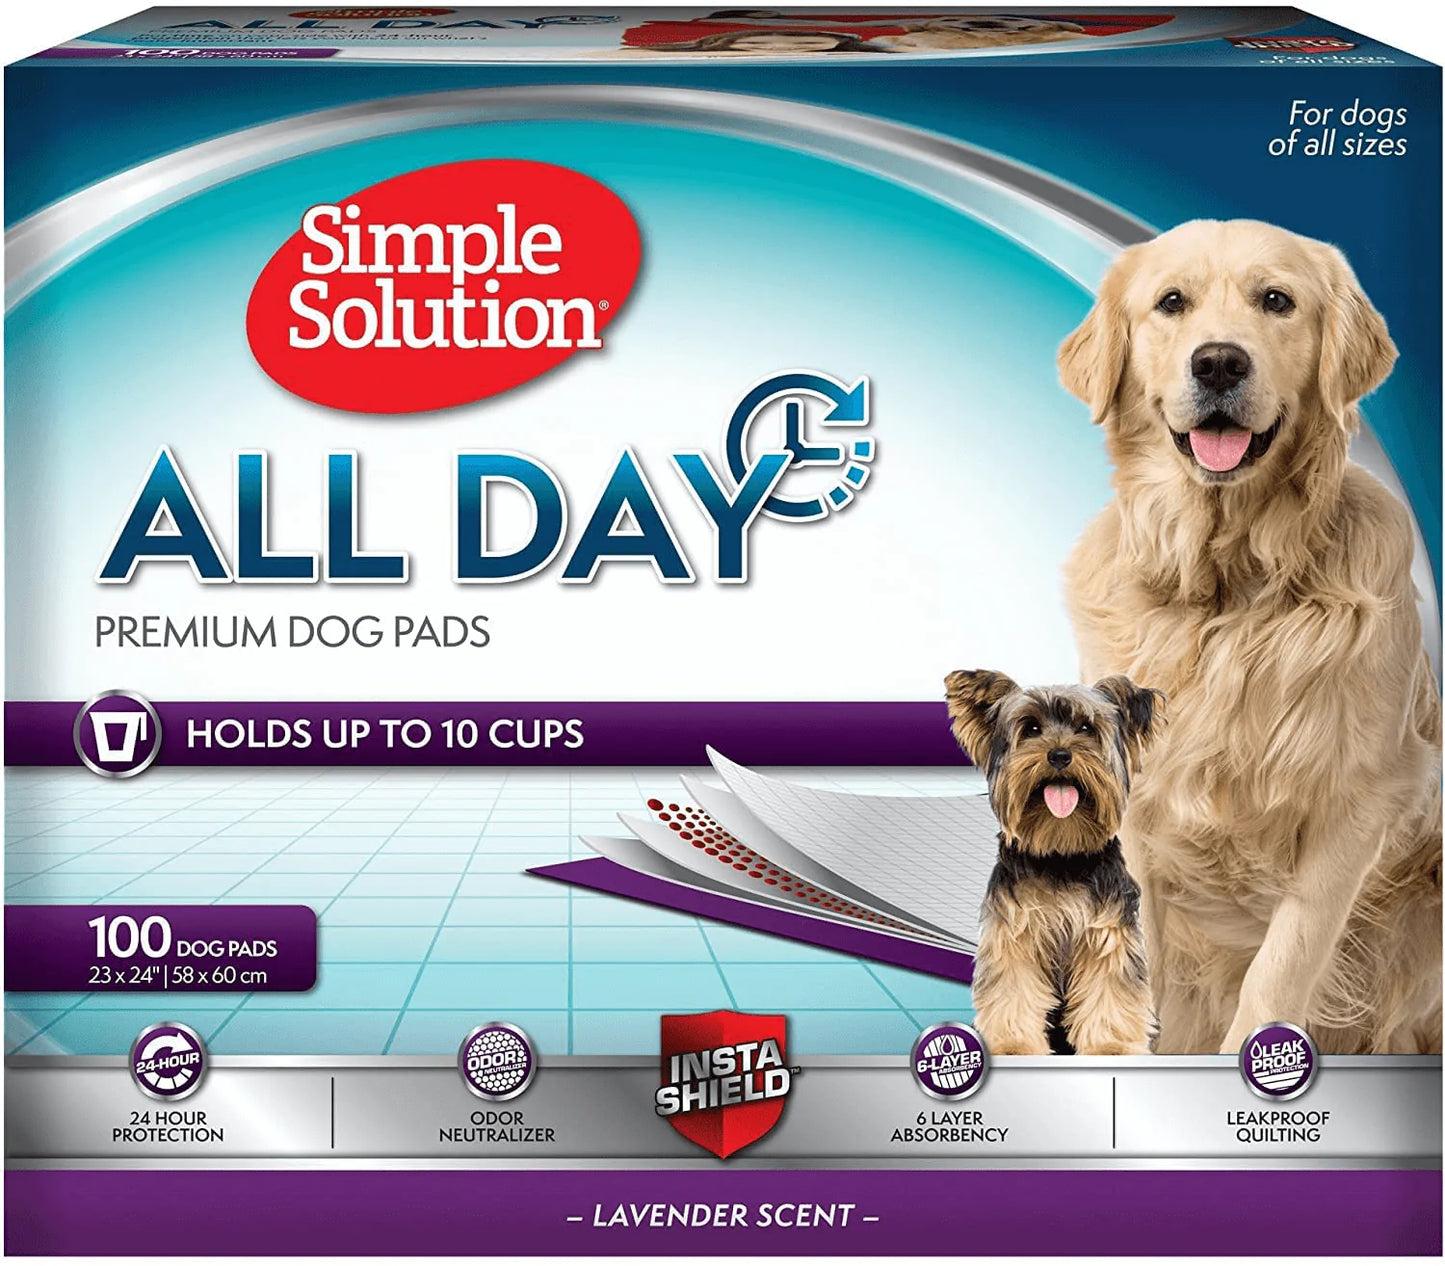 Simple Solution 6-Layer All Day Premium Dog Pads | Lavender Scent | 23 X 24 100 Pads